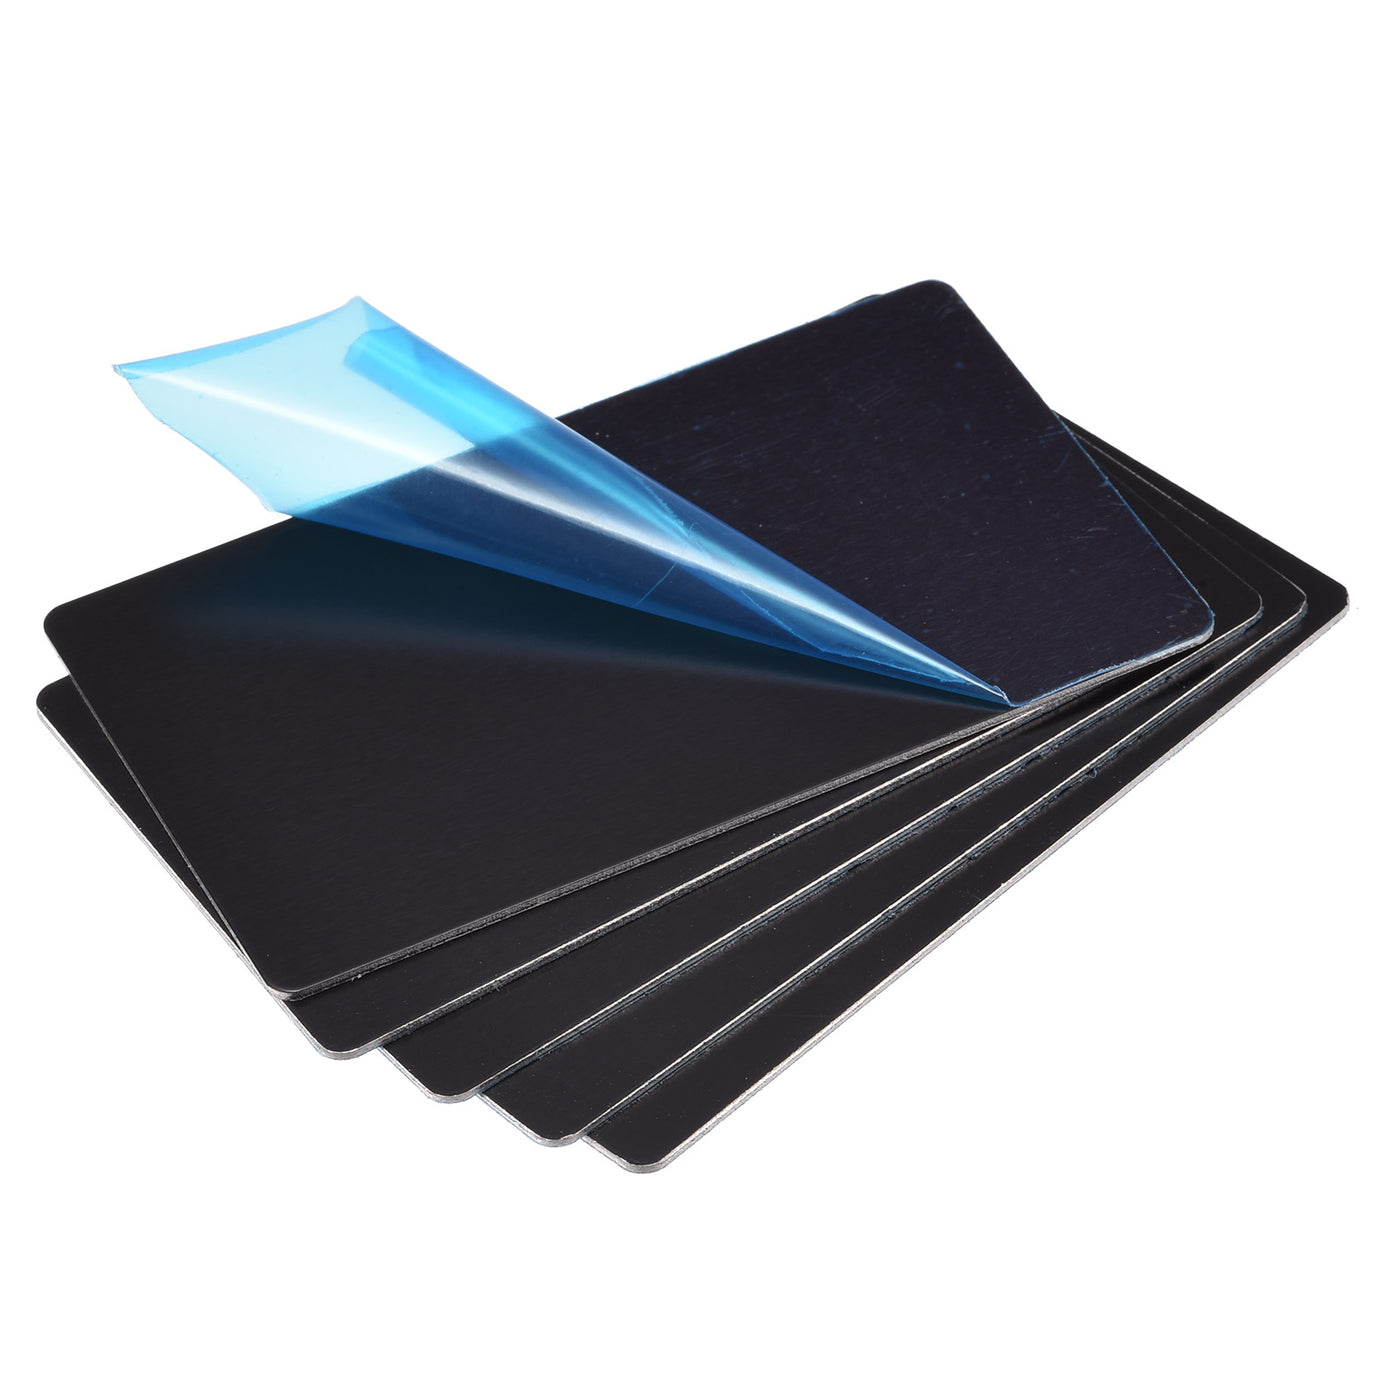 Uxcell Uxcell Blank Metal Card 85mm x 50mm x 1mm Anodized Aluminum Plate Black 5 Pcs